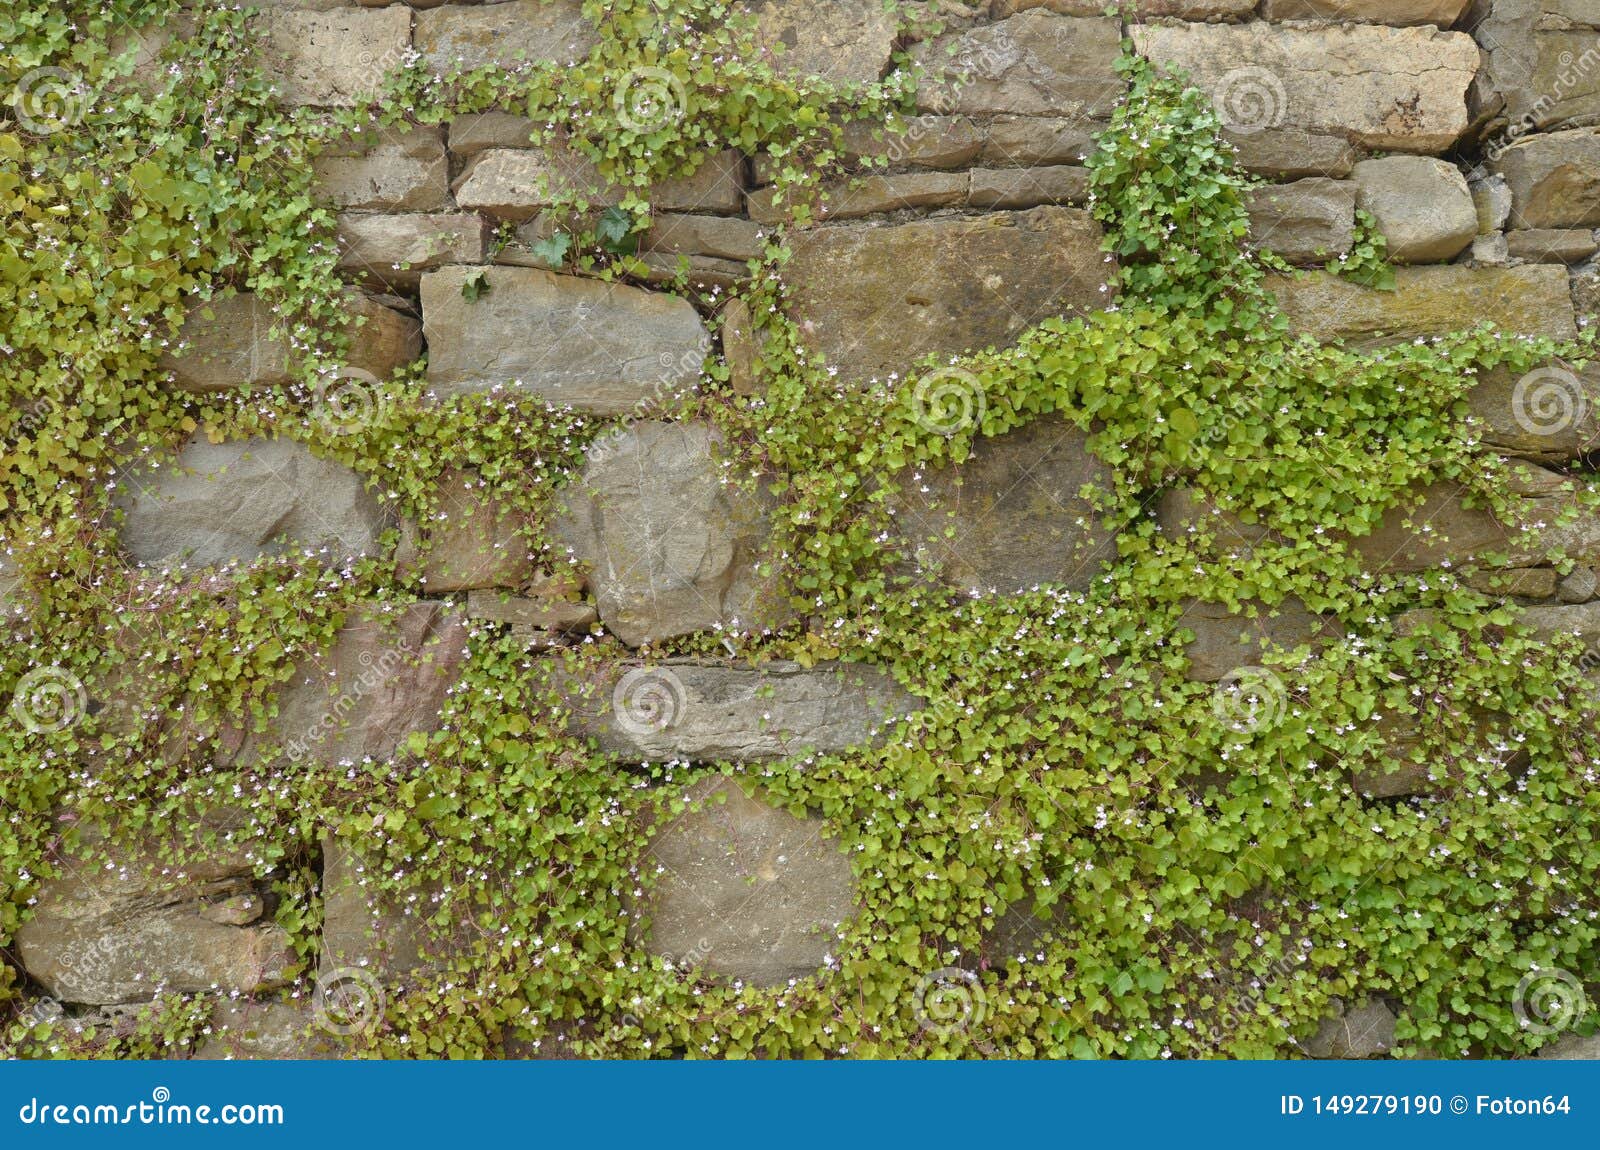 Blooming Green Ivy Climbing on Aged Grit Stone Wall. Vegetation ...